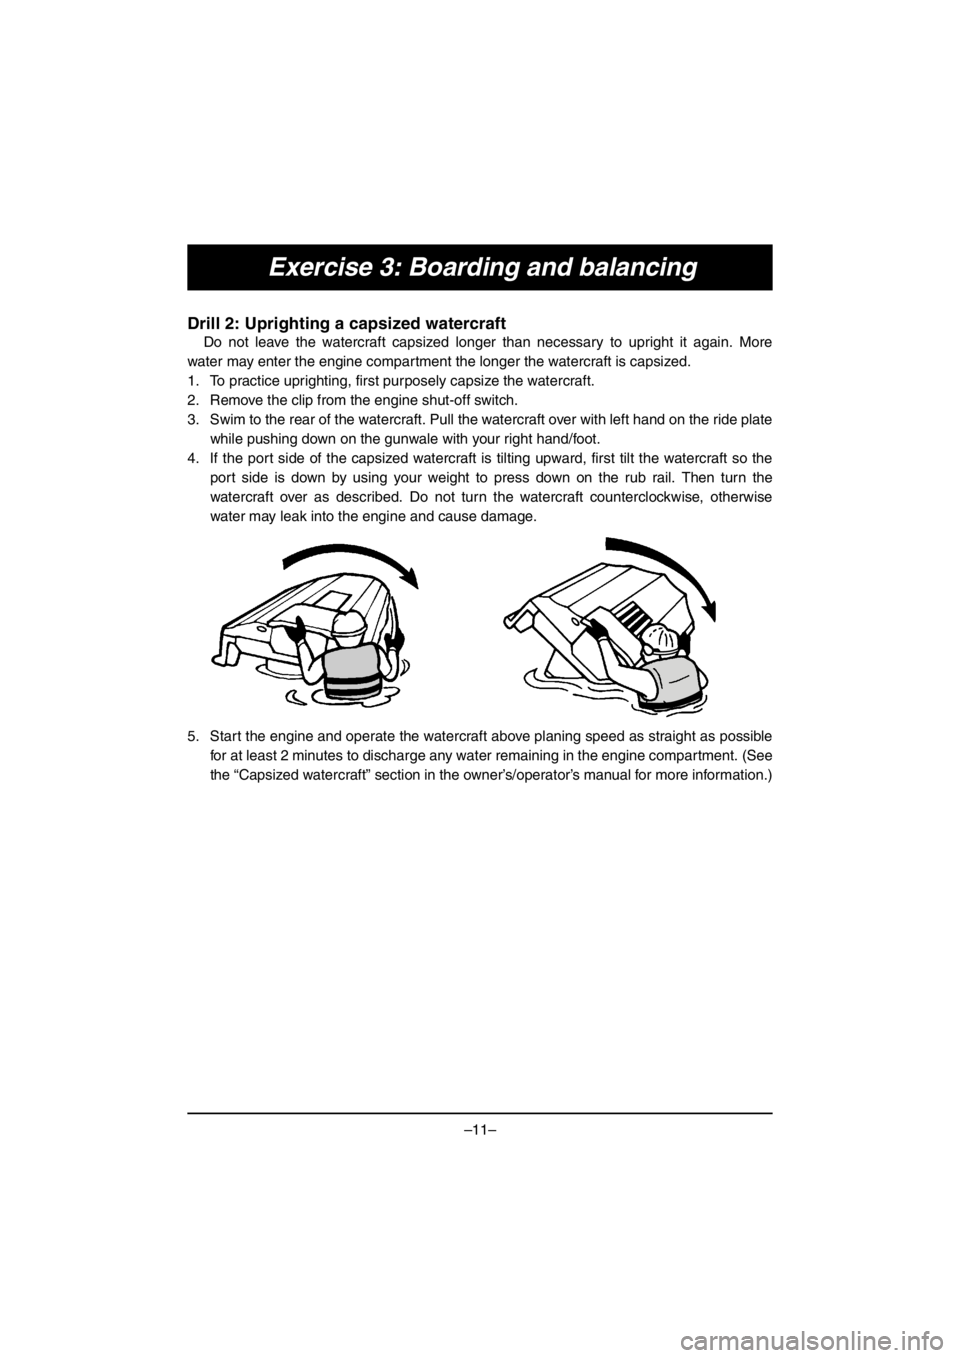 YAMAHA V1 2016  Owners Manual –11–
Exercise 3: Boarding and balancing
Drill 2: Uprighting a capsized watercraft
Do not leave the watercraft capsized longer than necessary to upright it again. More
water may enter the engine co